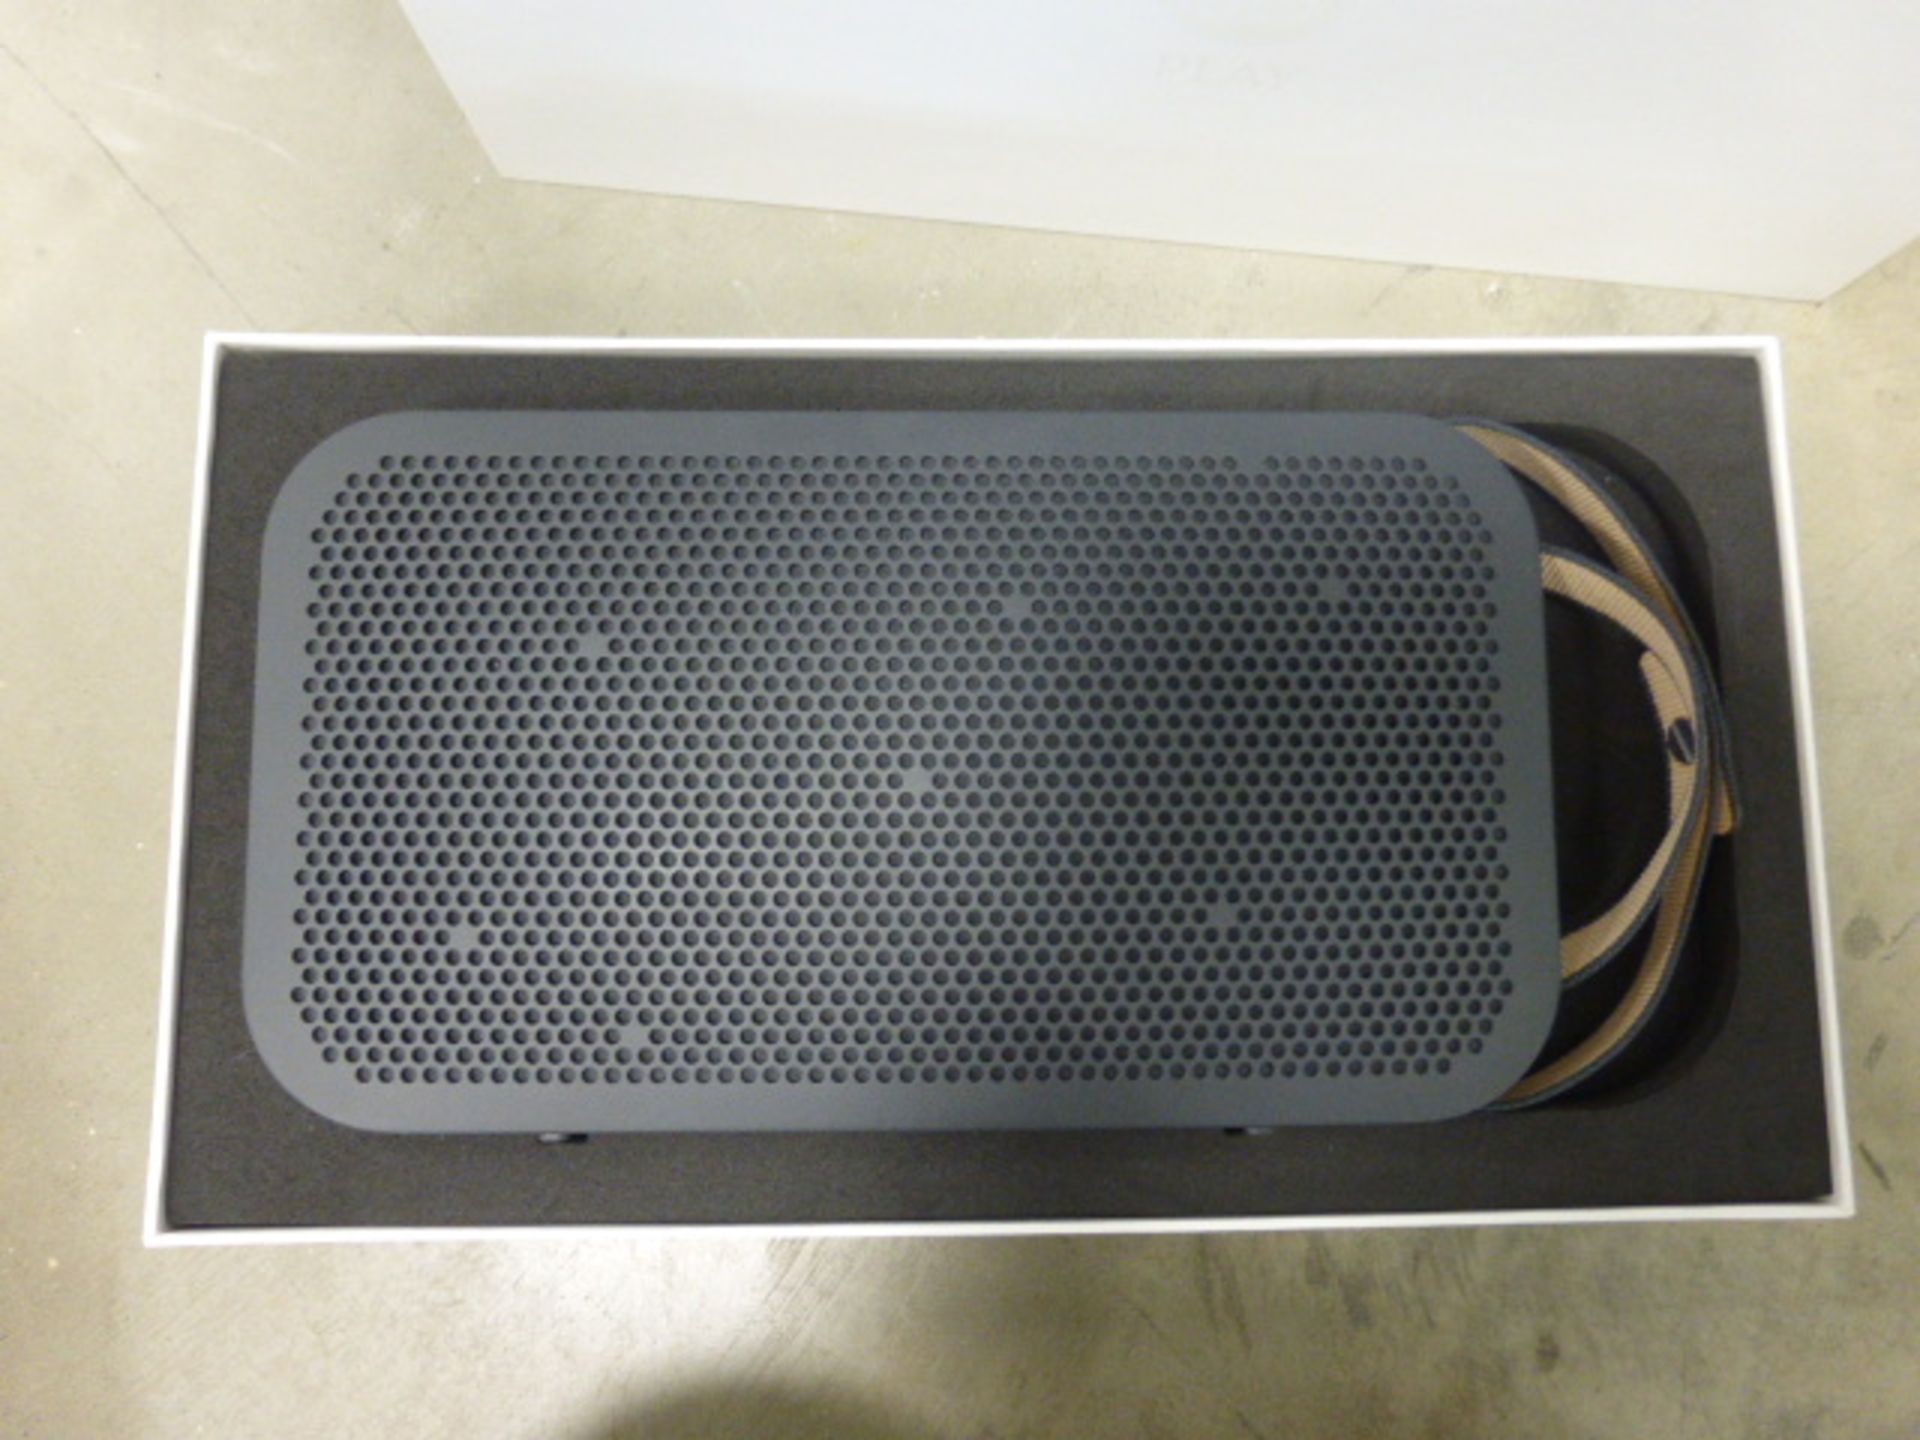 Bang & Olufsen portable bluetooth speaker model A2 Active in box